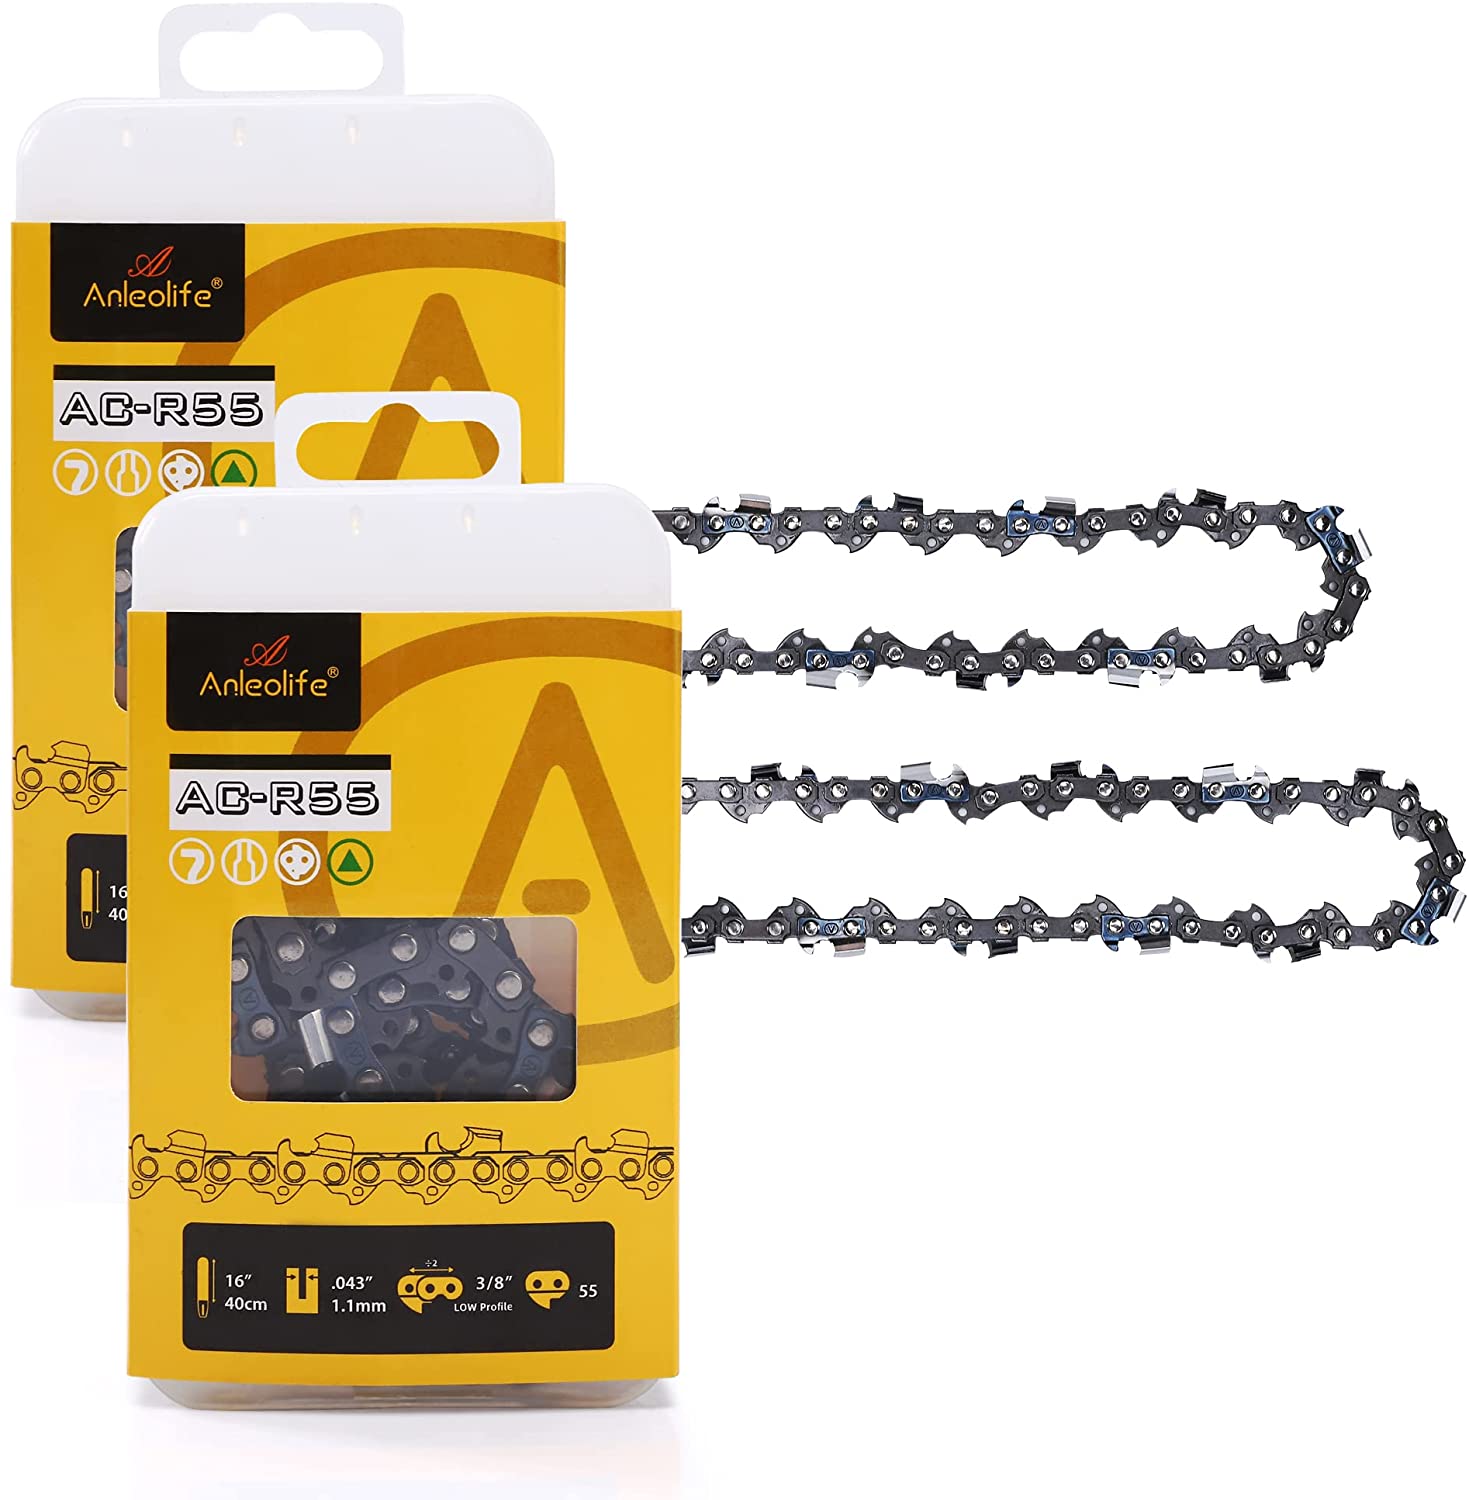 Anleolife  Semi Chisel Chainsaw Chain for 16 inch Bar, Gauge .043